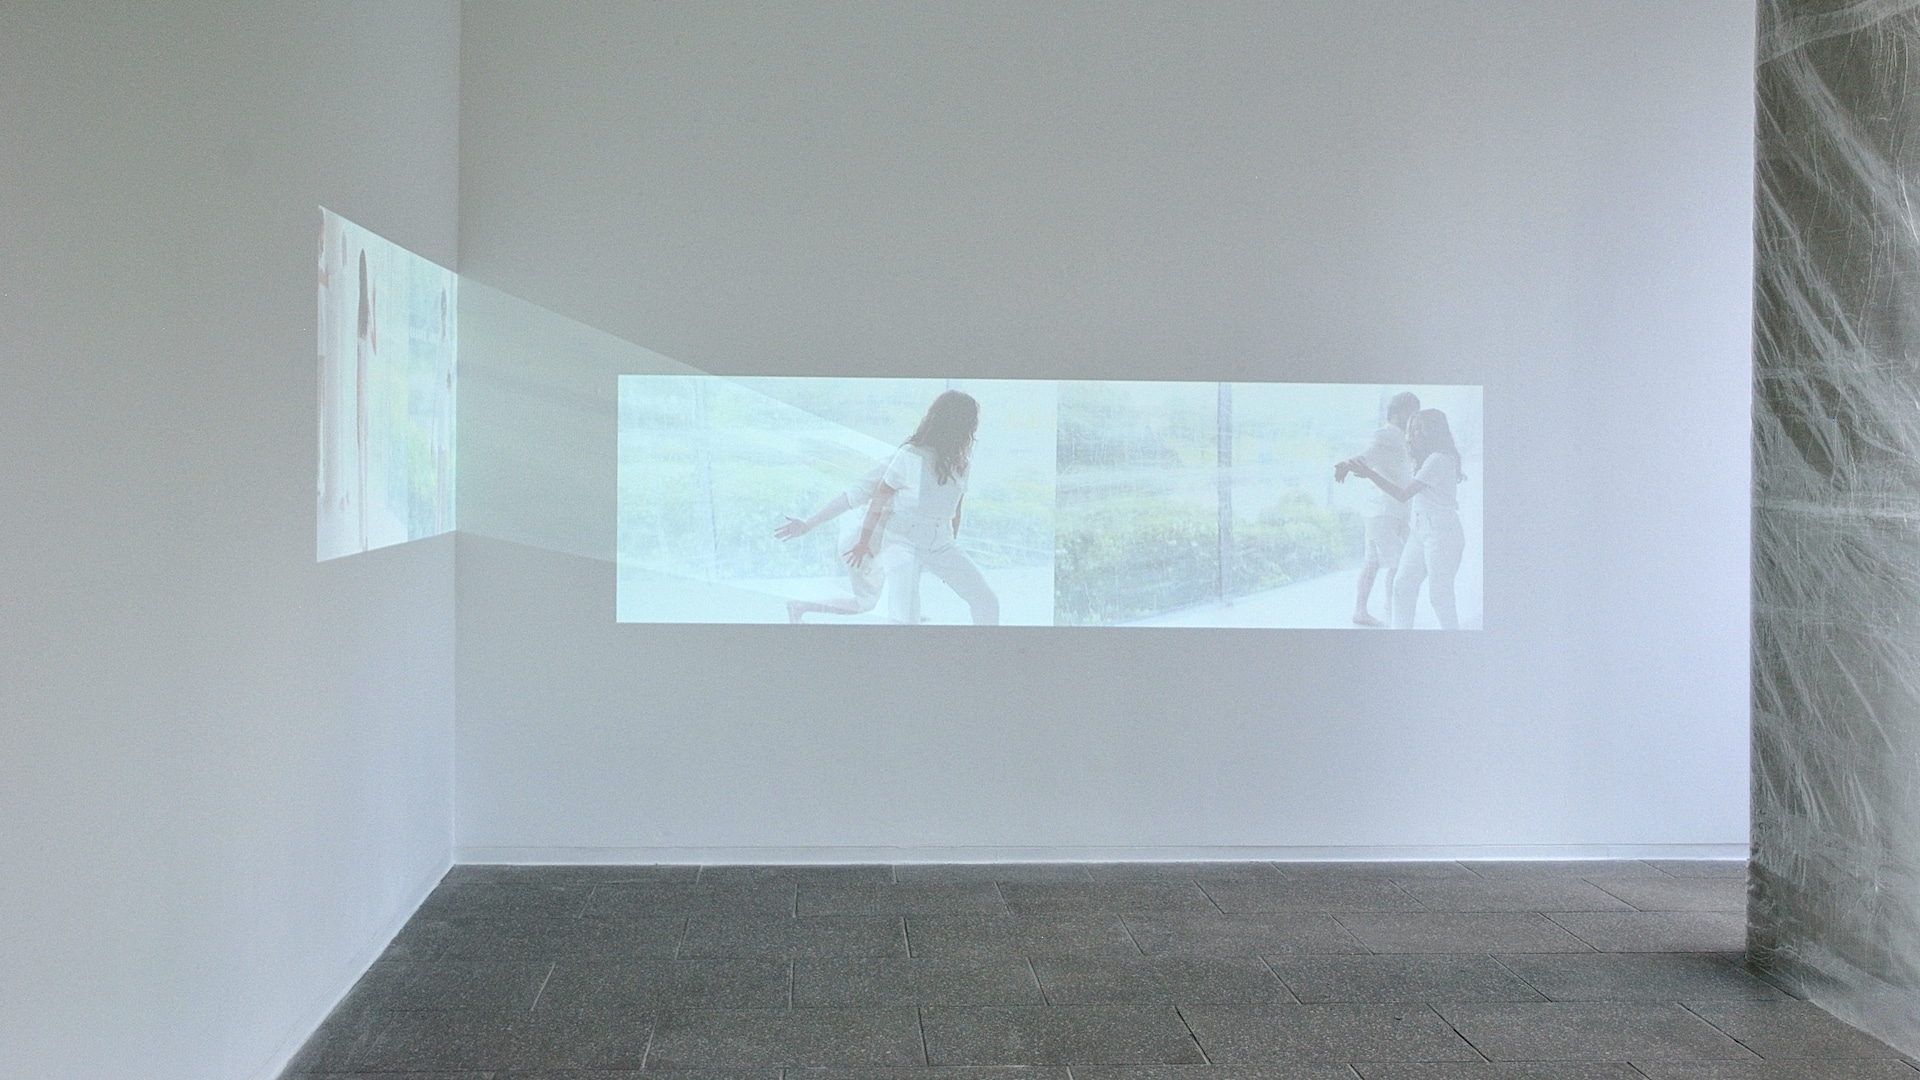 Cos Ahmet, A Meniscus Between, 2021 - Installation view. Two channel digital video projection, 5 mins 2 secs, audio, choreographic object, clear tape. Dimensions variable.